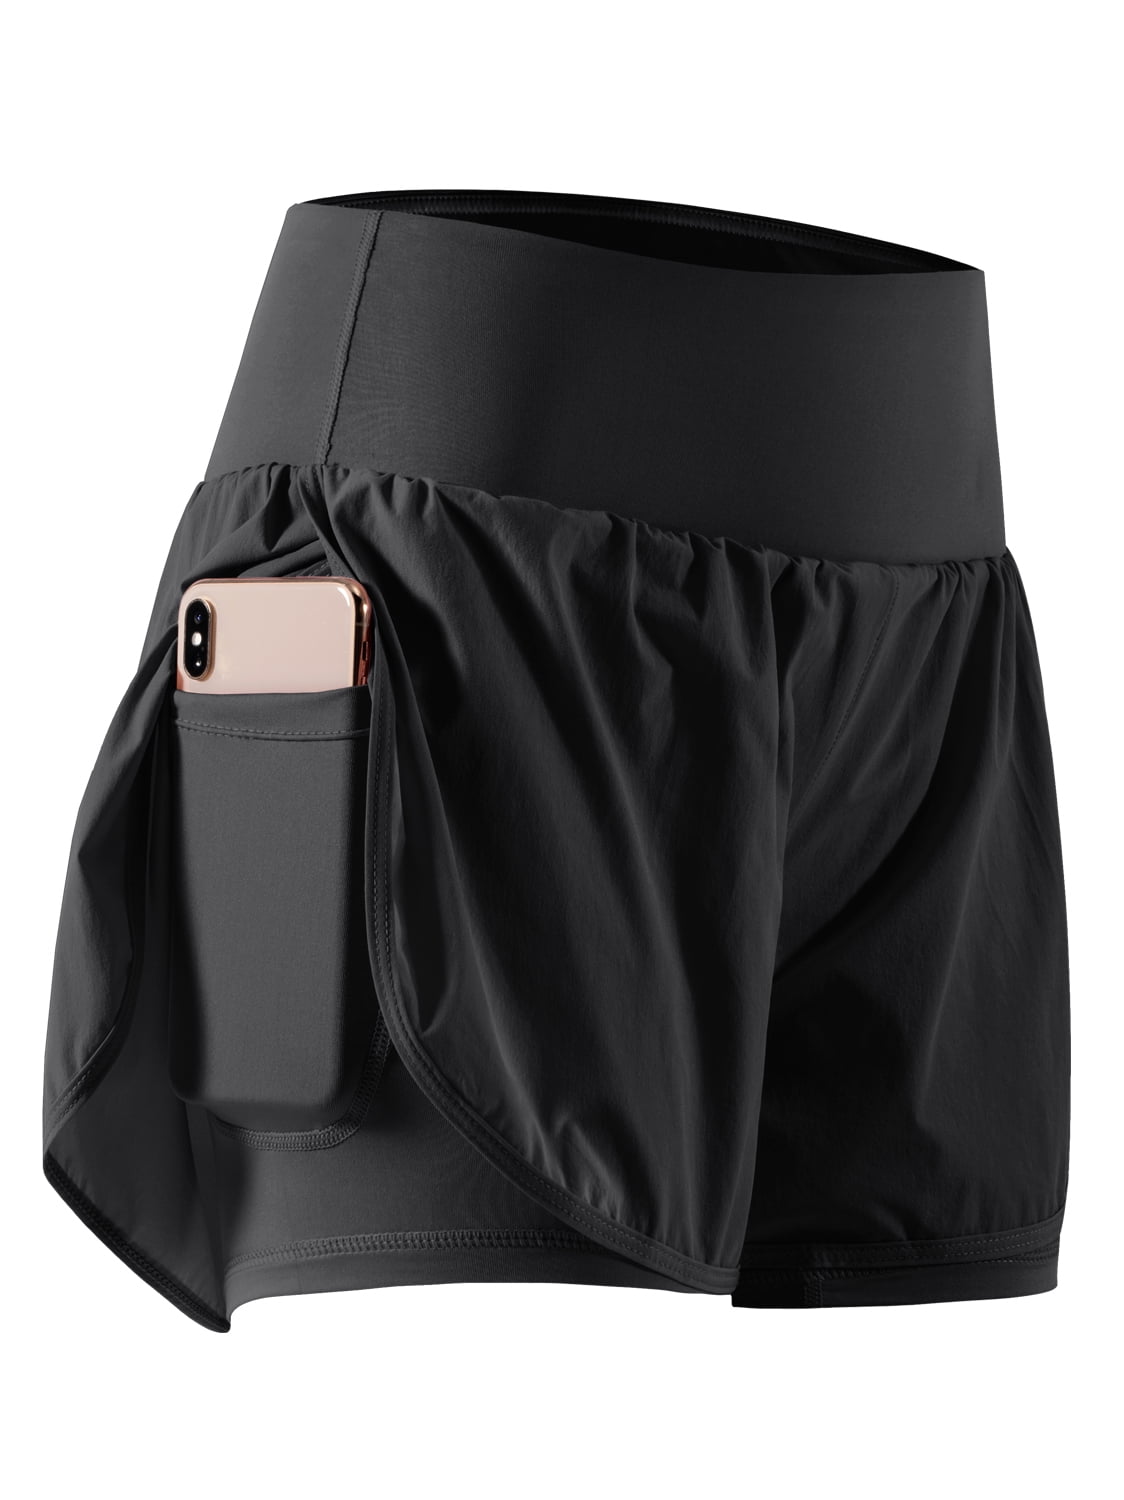 2 Pack Women's Quick Dry Athletic Shorts with Pockets Running Workout Gym  Shorts with Liner 